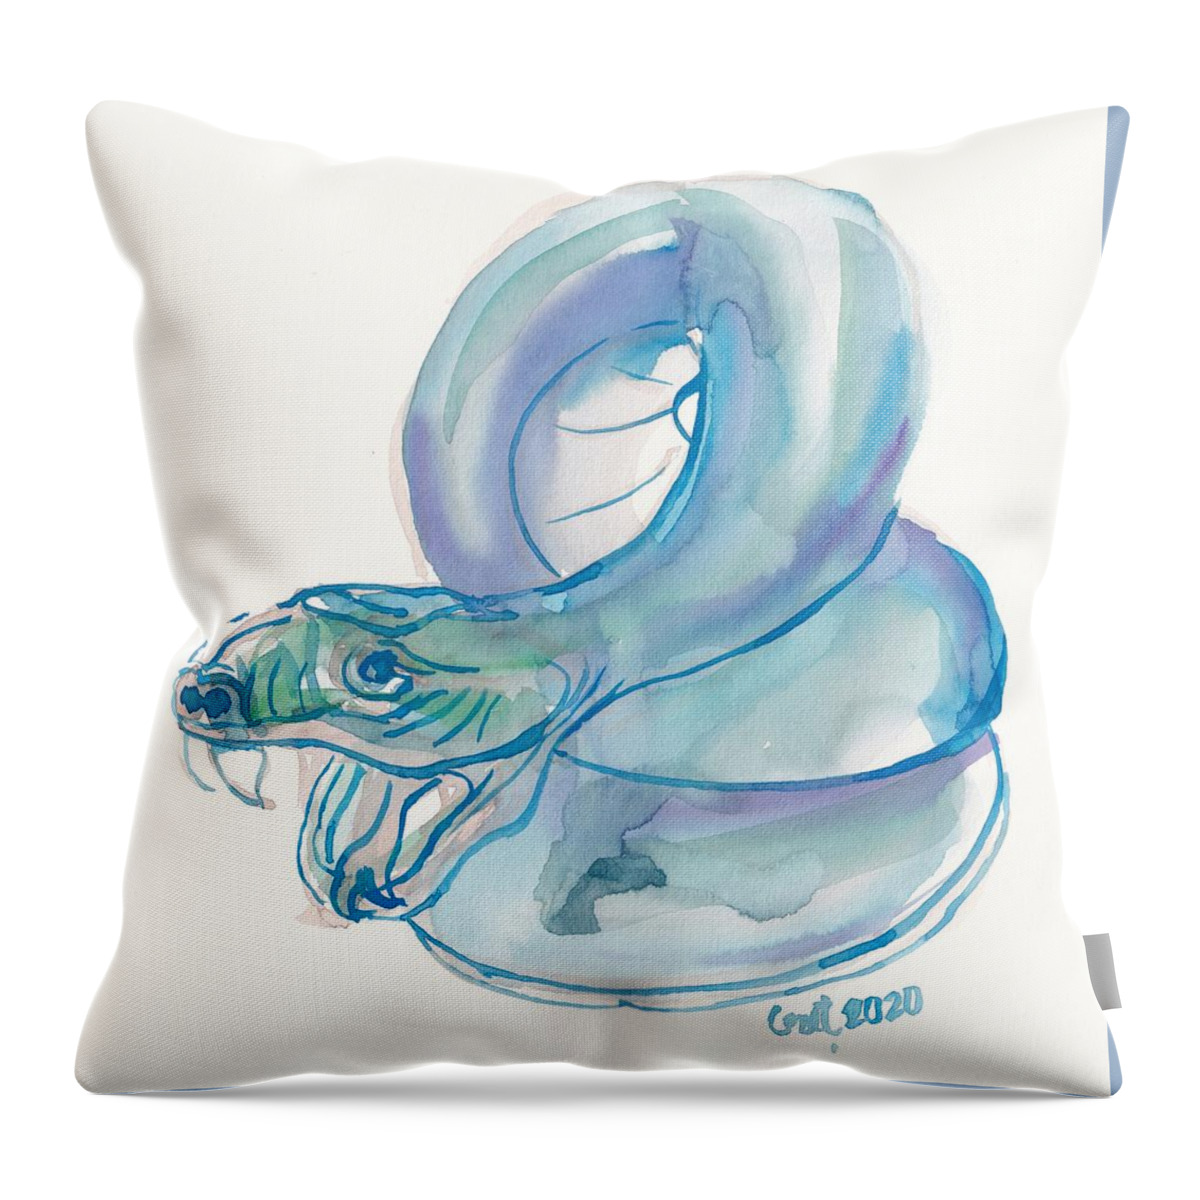 Miniature Throw Pillow featuring the painting Giant Snake by George Cret